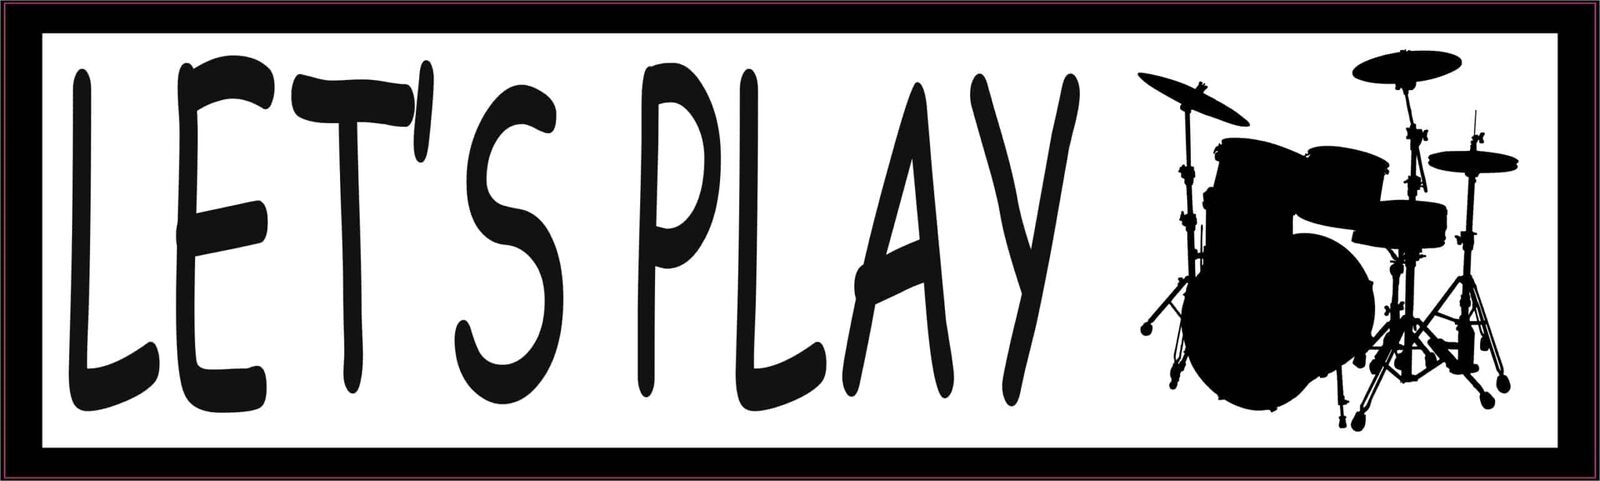 10in x 3in Lets Play Drums Vinyl Sticker Car Truck Vehicle Bumper Decal